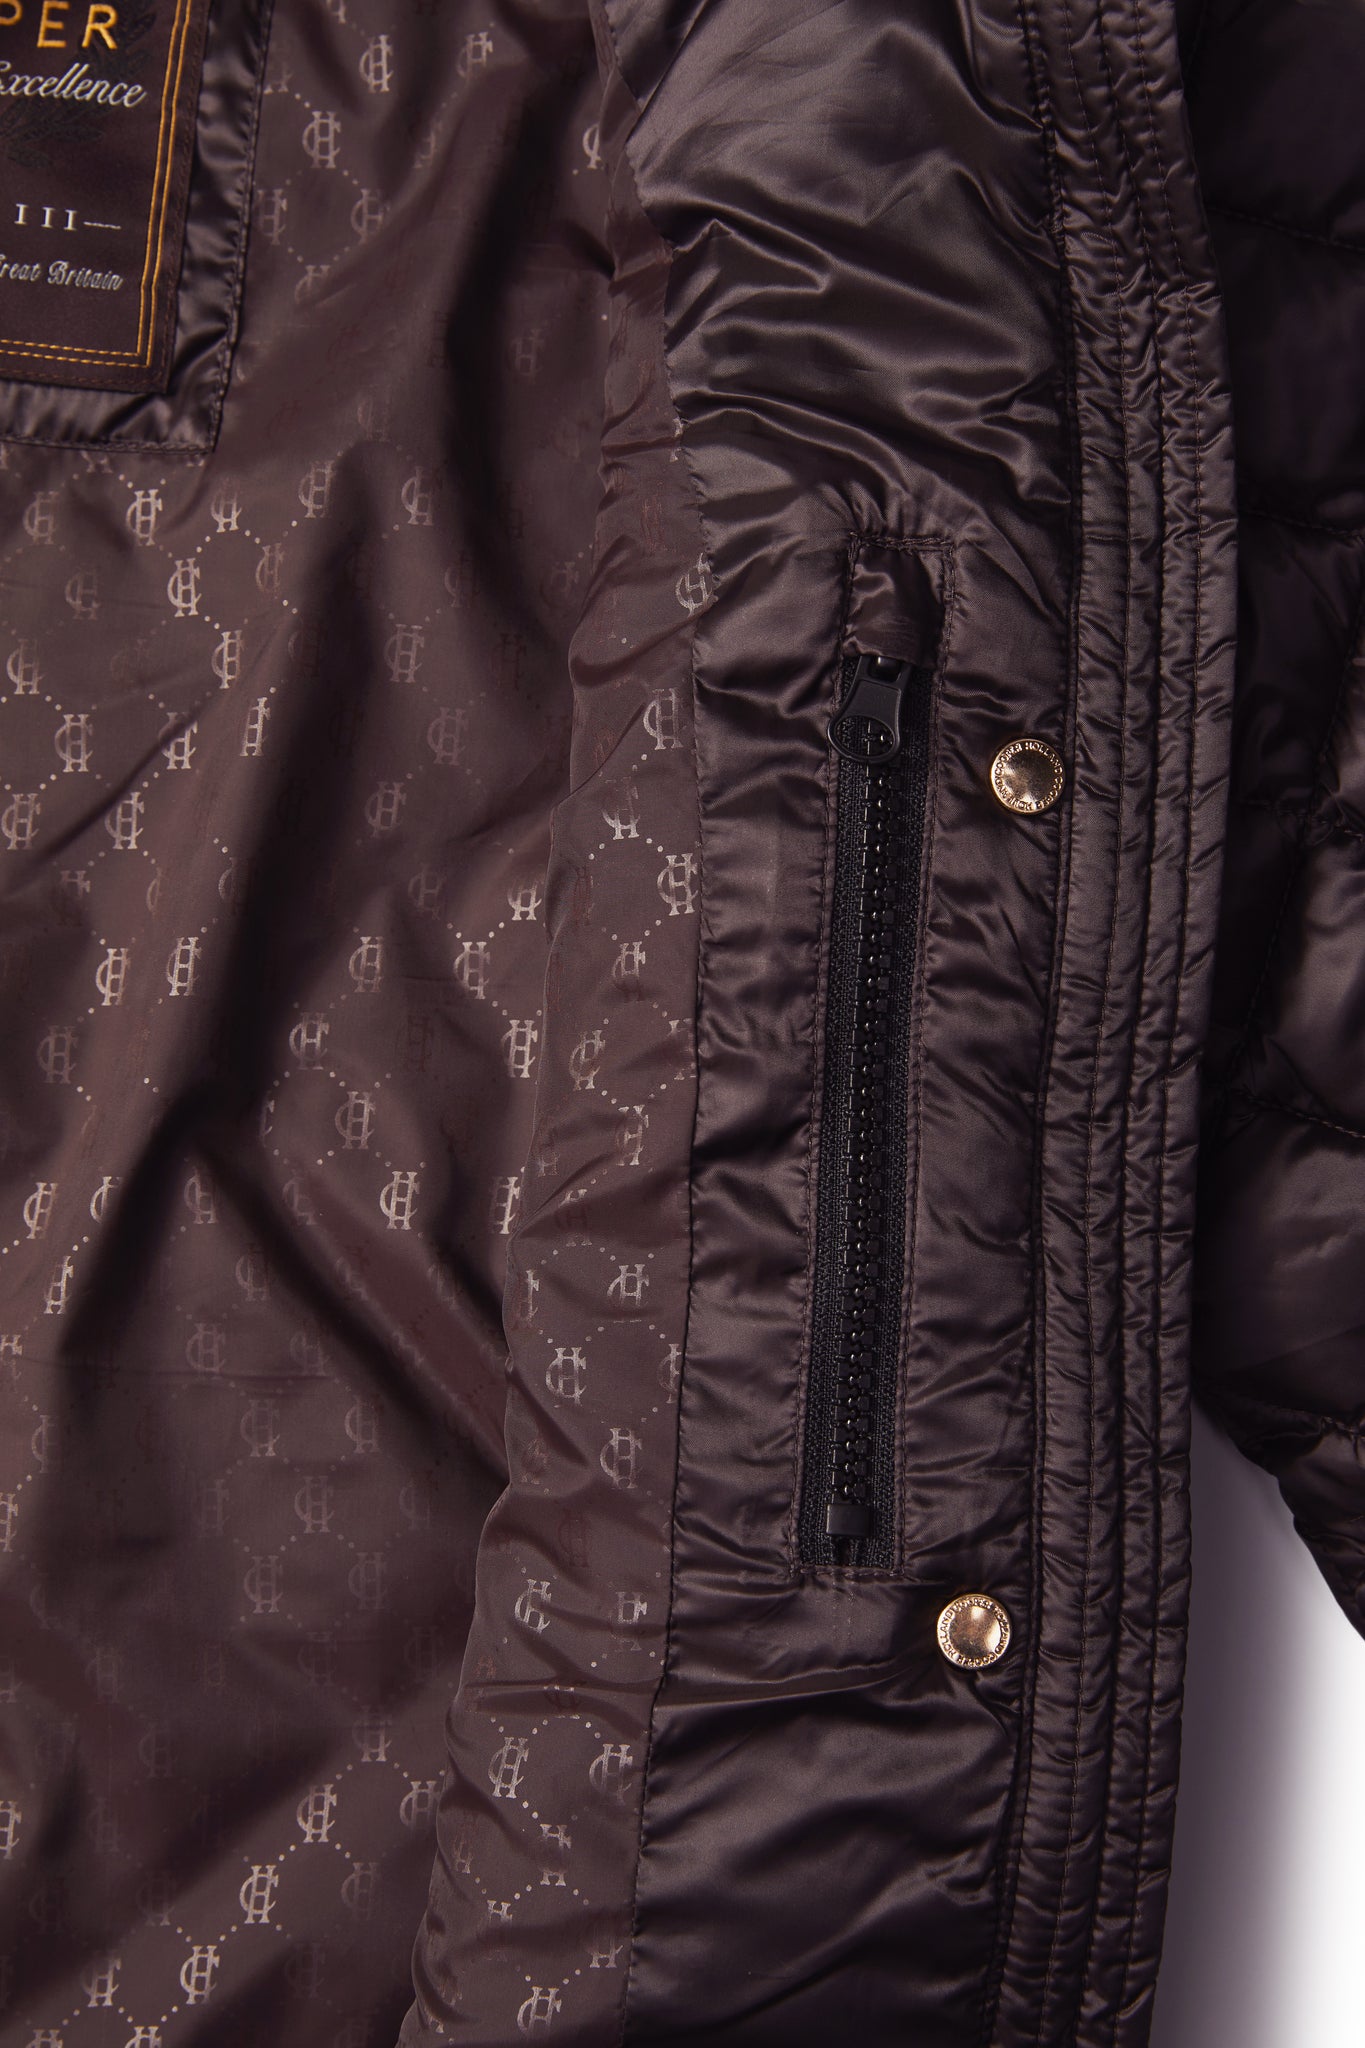 inside pocket detail on womens diamond quilted chocolate jacket with contrast tan leather elbow and shoulder pads large front pockets and shirred side panels